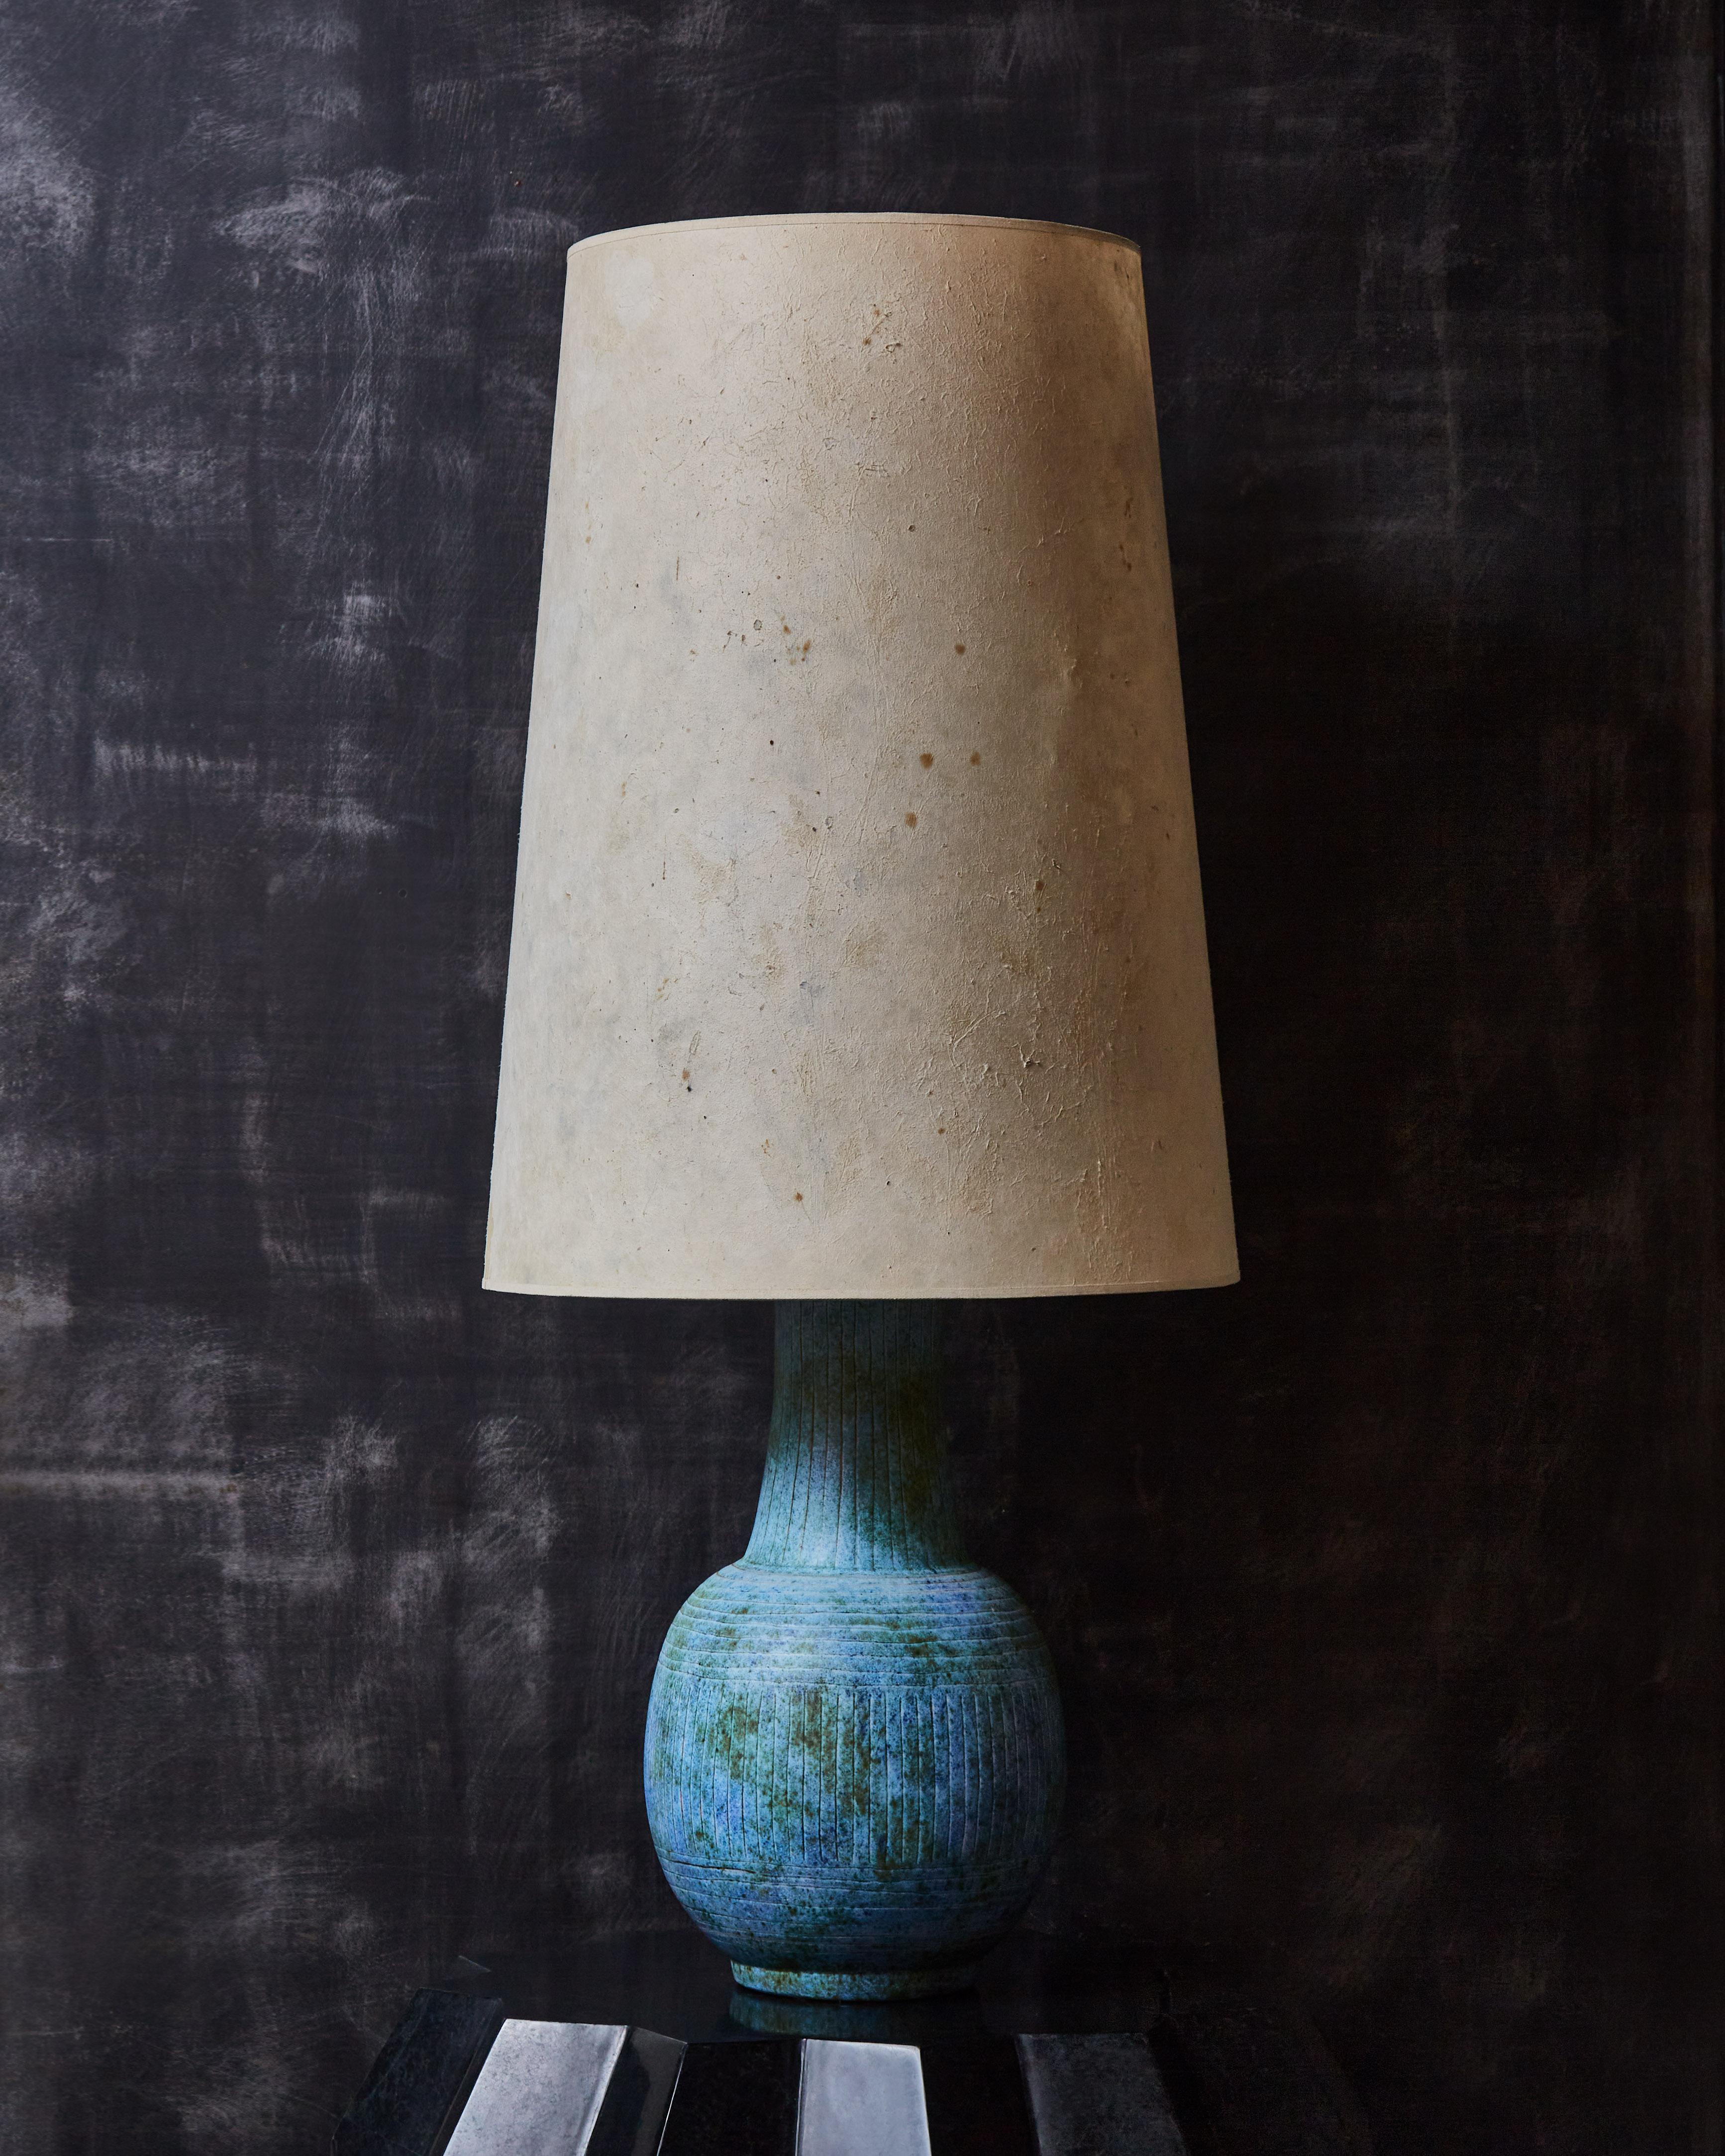 Single table lamp made of blue ceramic with engraved decors. Original imposing shade from the 1970s.